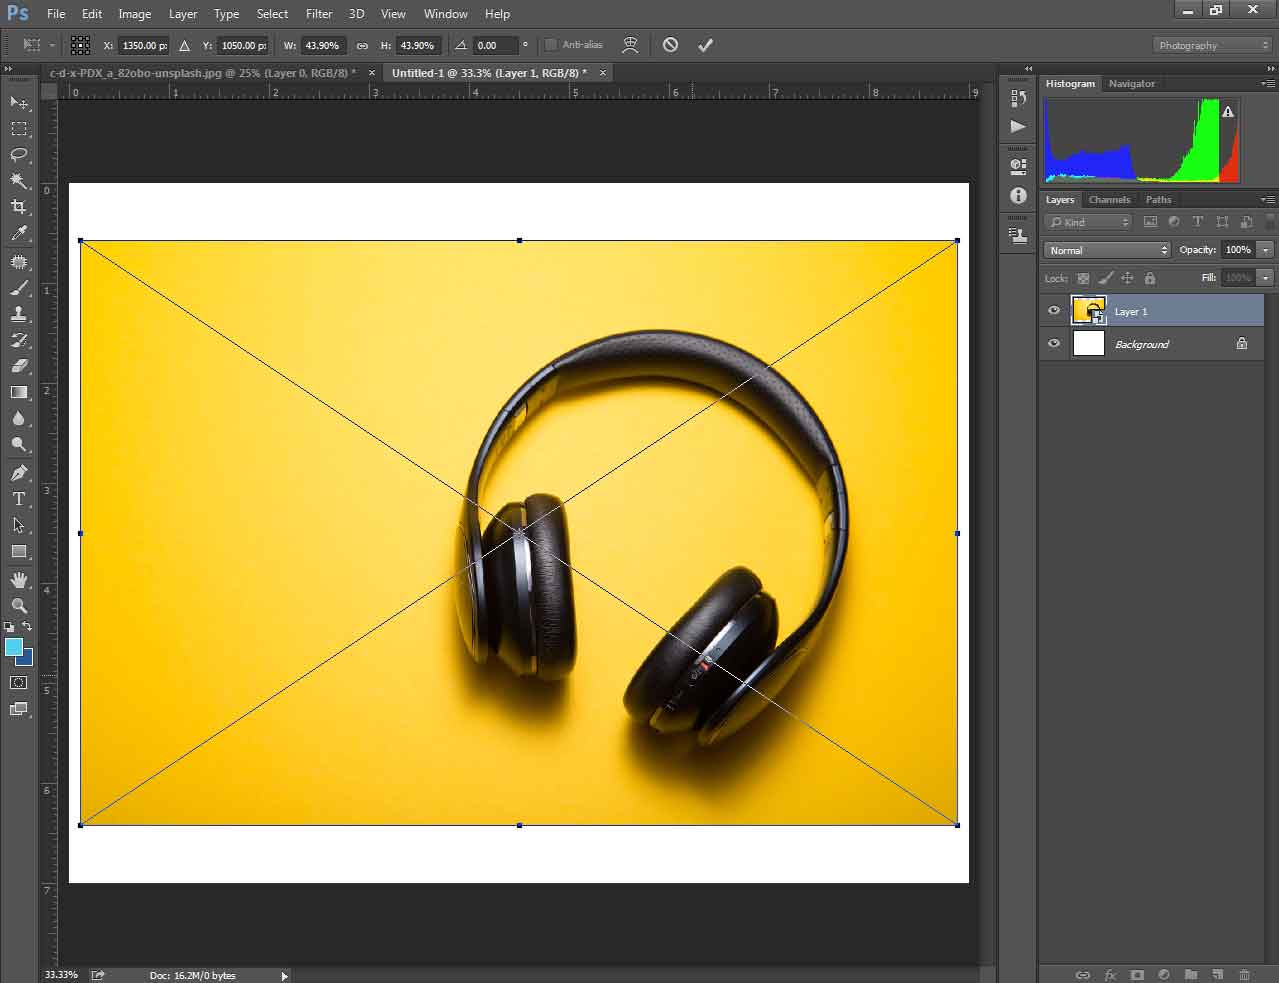 How to resize an image in Photoshop and keep the best quality